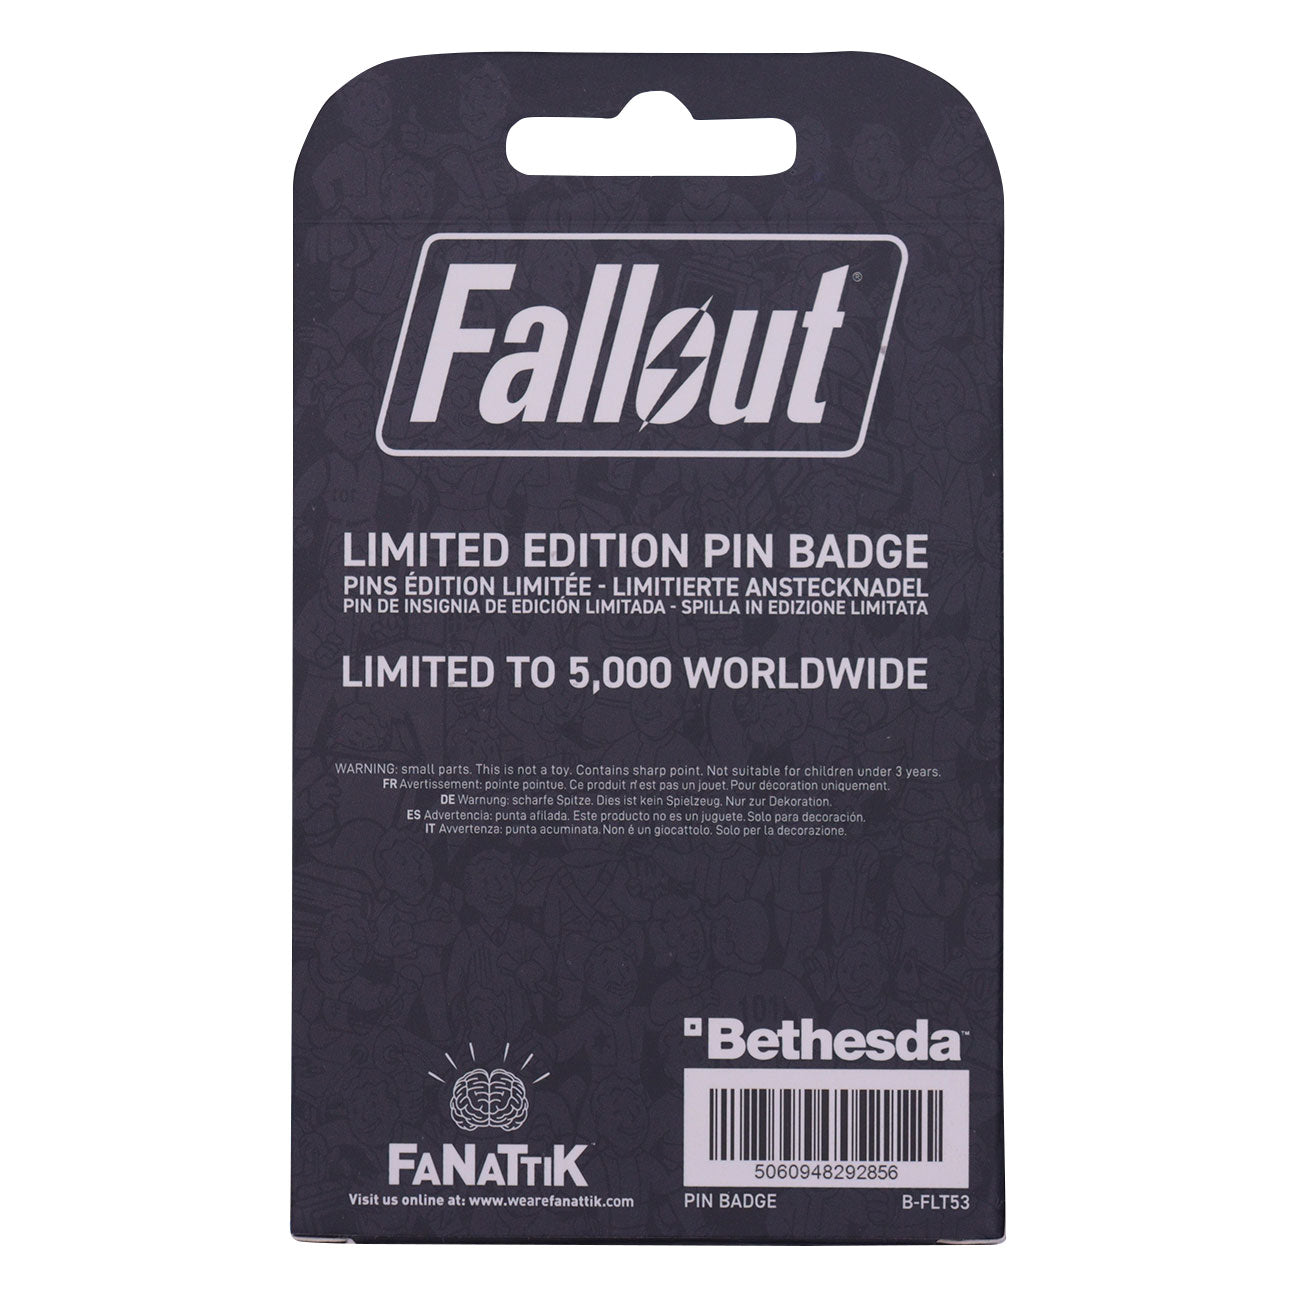 Fallout Limited Edition Vault Boy Pin Badge